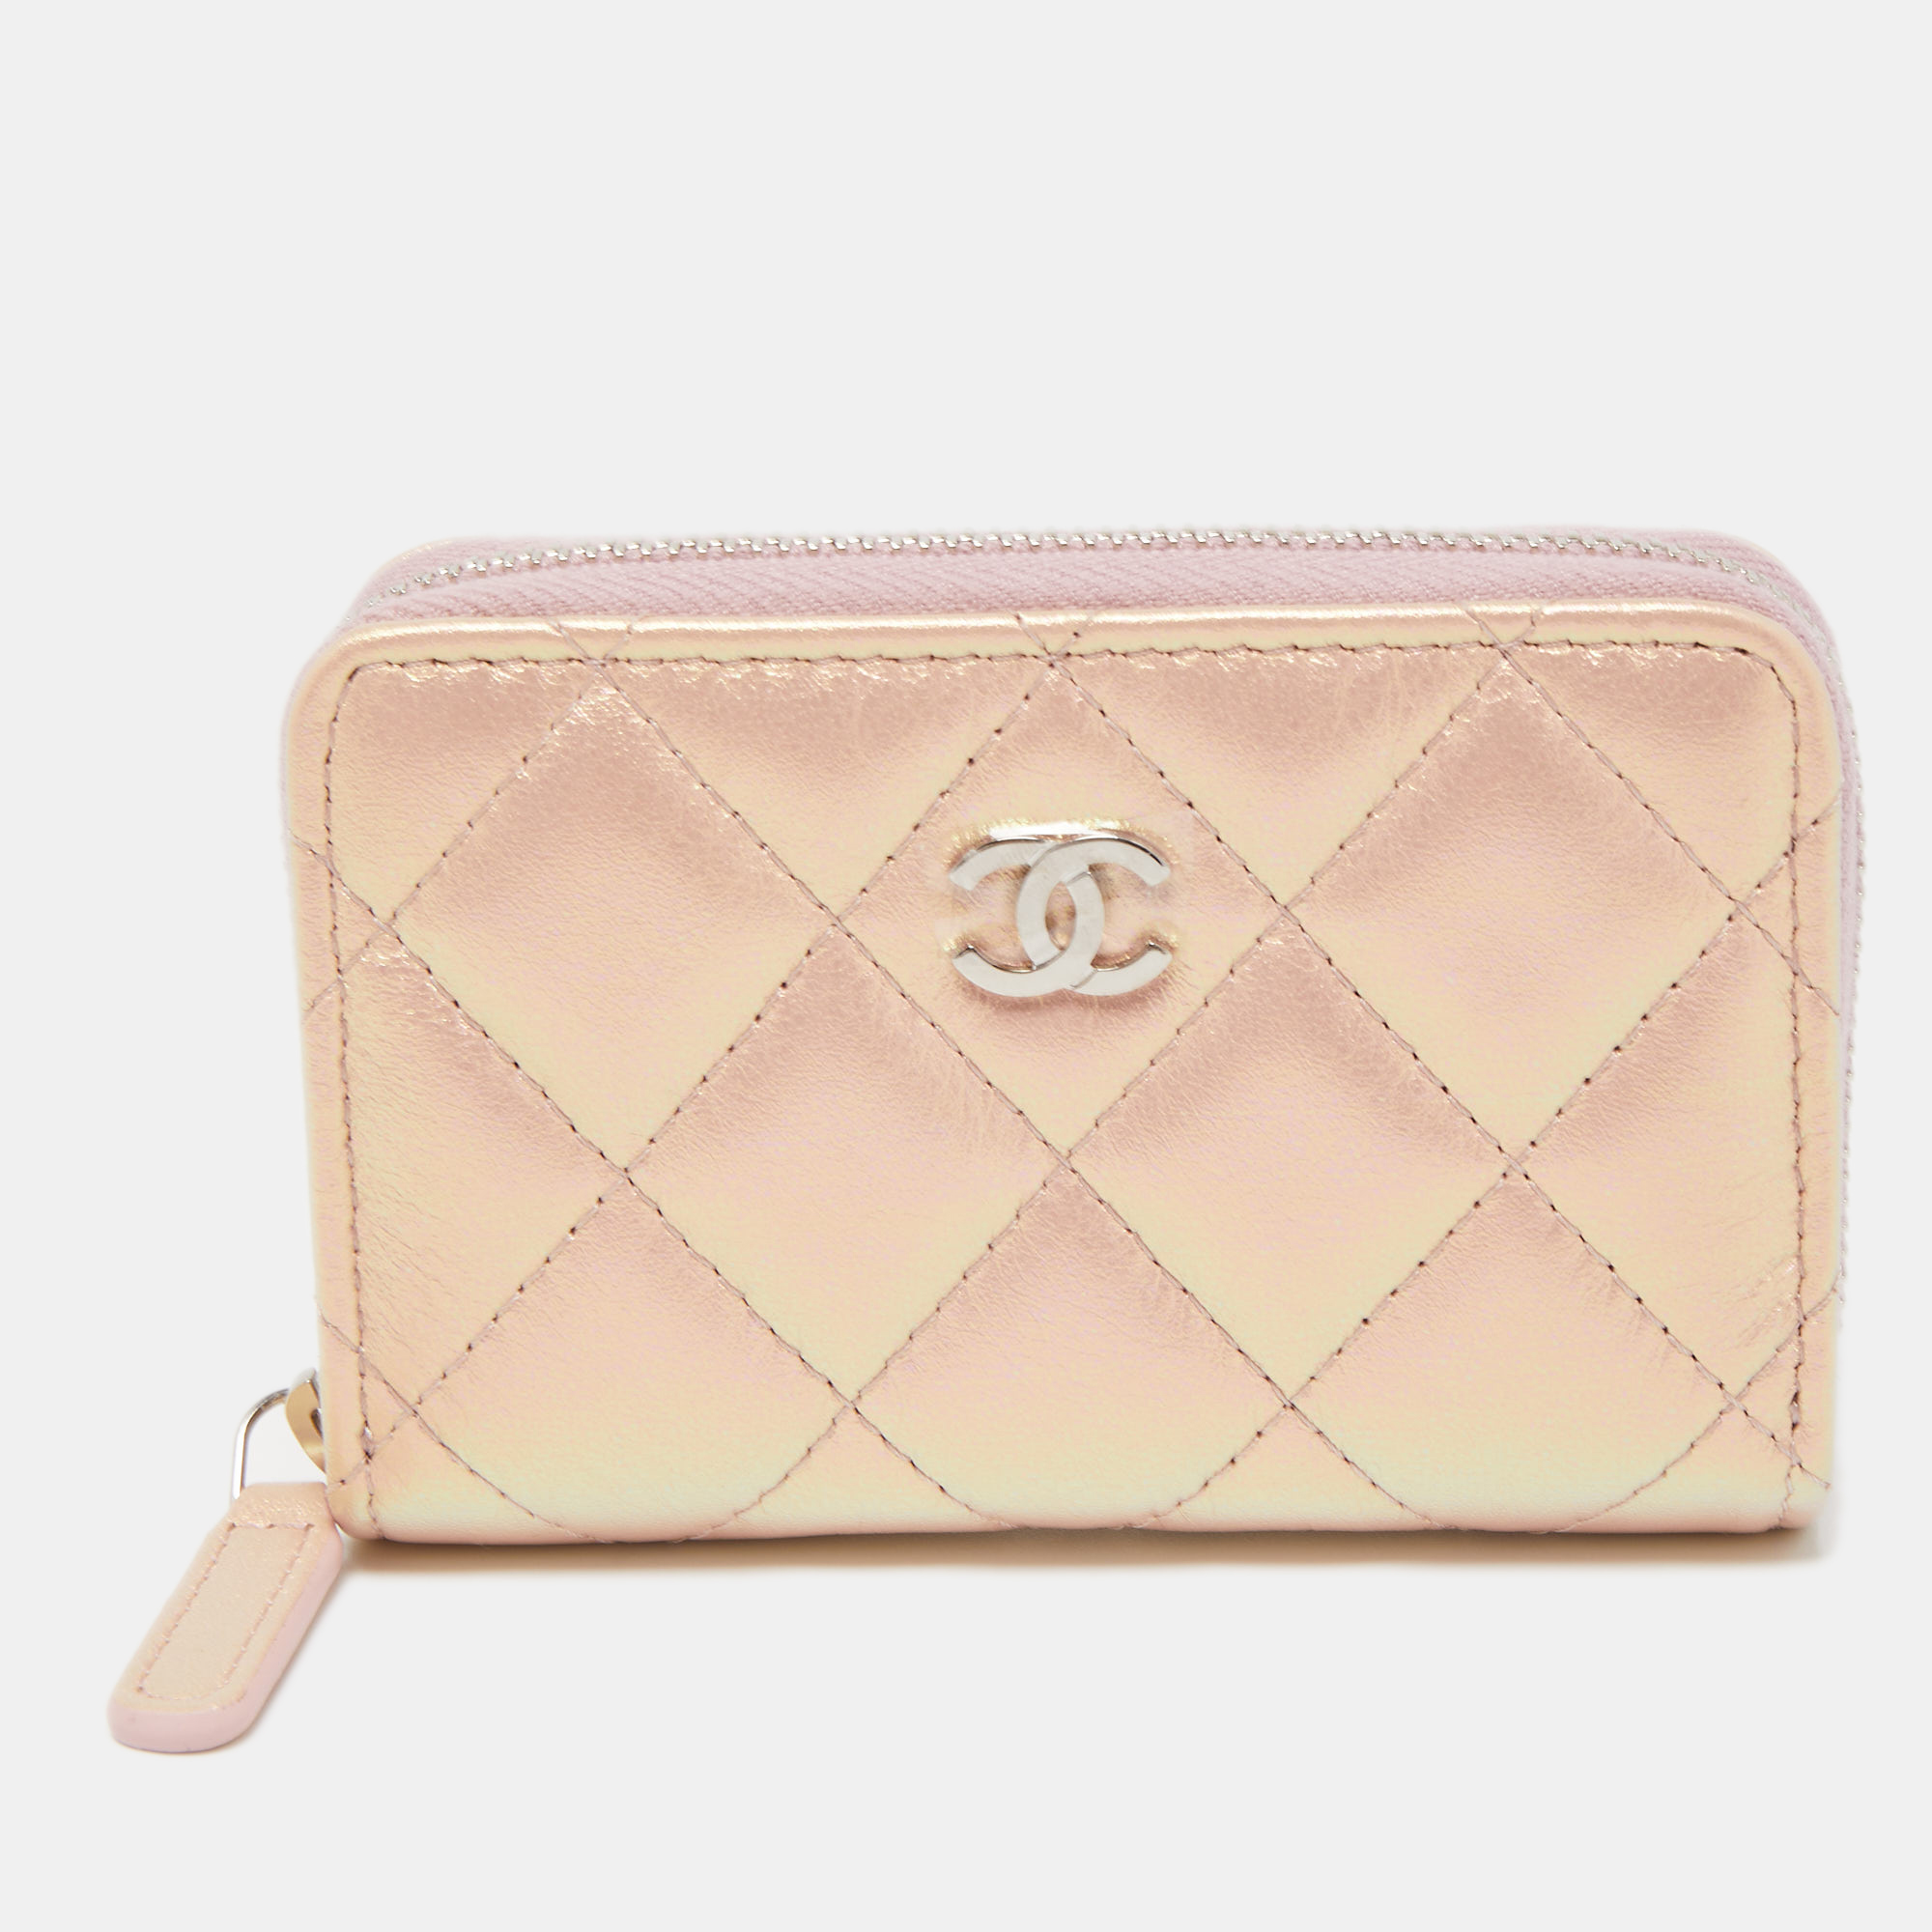 Keep all your change in one place so you do not have to go to the depths of your bag in search for it every time. Chanel brings you this stunning coin purse for exactly that purpose. Crafted from stunning pink quilted Caviar leather this purse makes for an extremely stylish look with the timeless CC logo on the front.